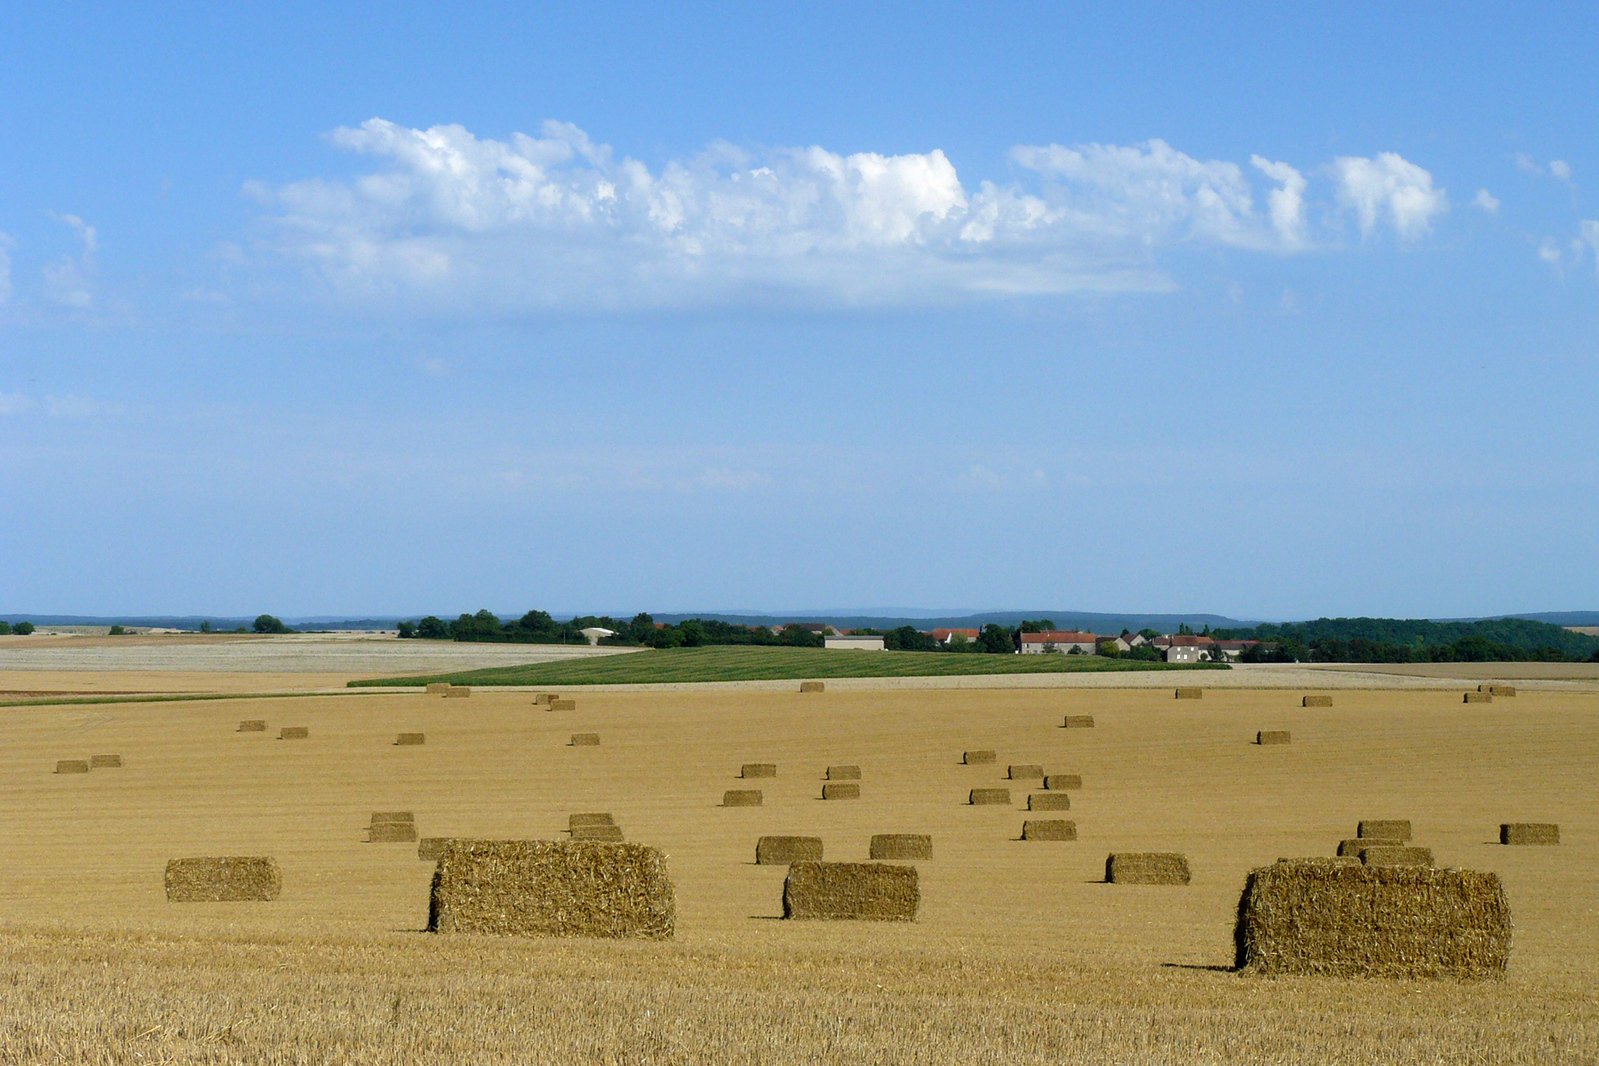 several straw bales placed out in an open field